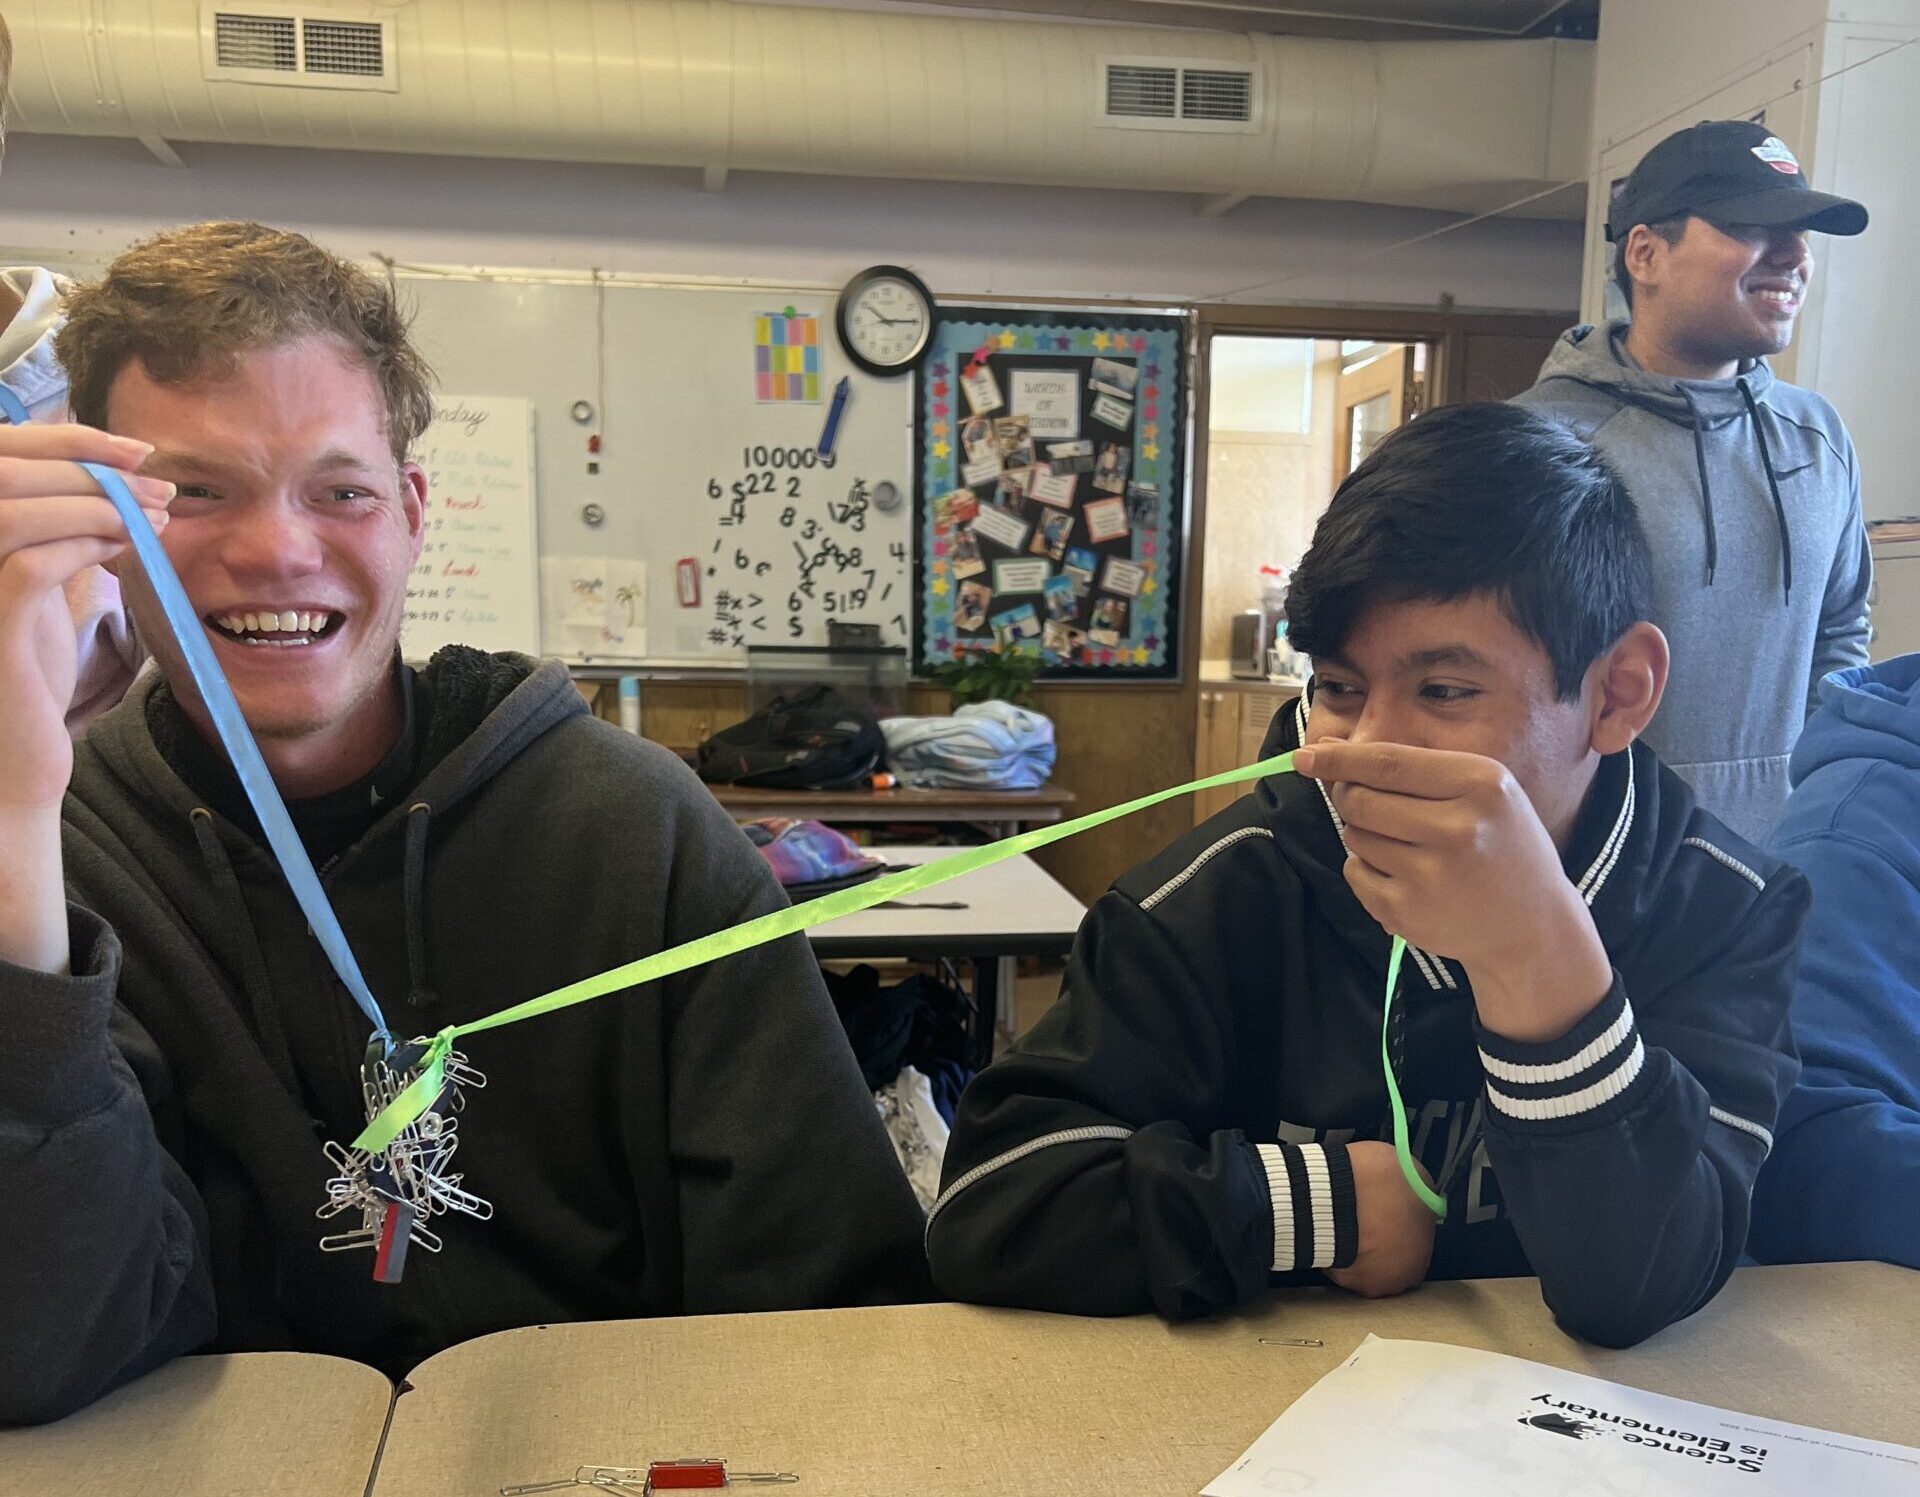 Two high school boys sit in a crowded classroom, laughing as they work on an experiment using magnets and ribbons to hold a pile of paperclips in the air between them.